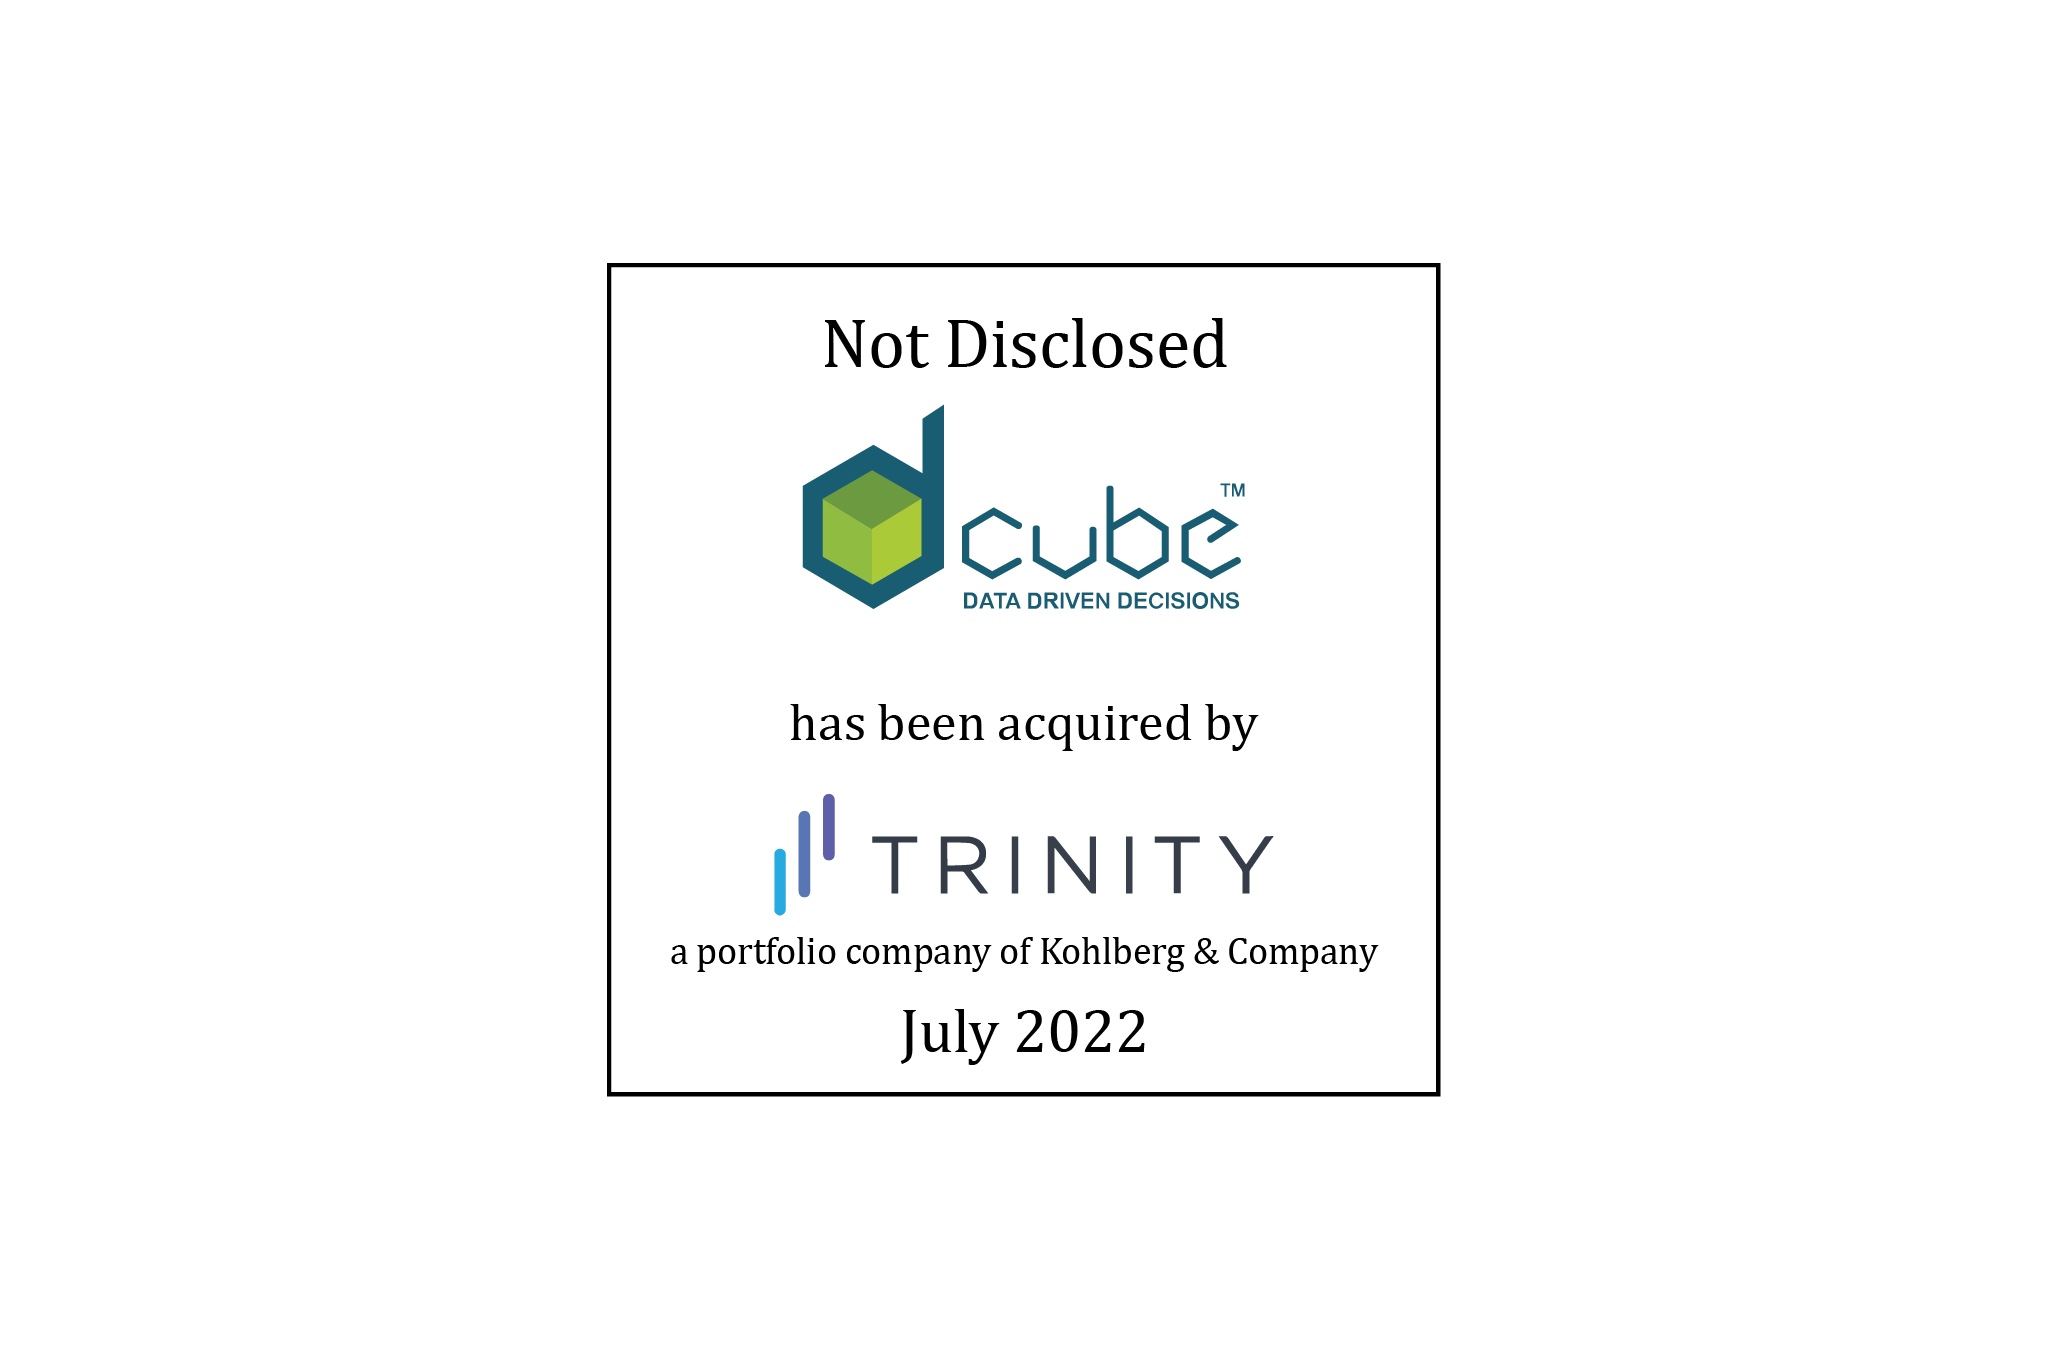 Not Disclosed, D-Cube (data driven decisions) has been acquired by Trinity, a portfolio company of Kohlberg & Company, July 2022